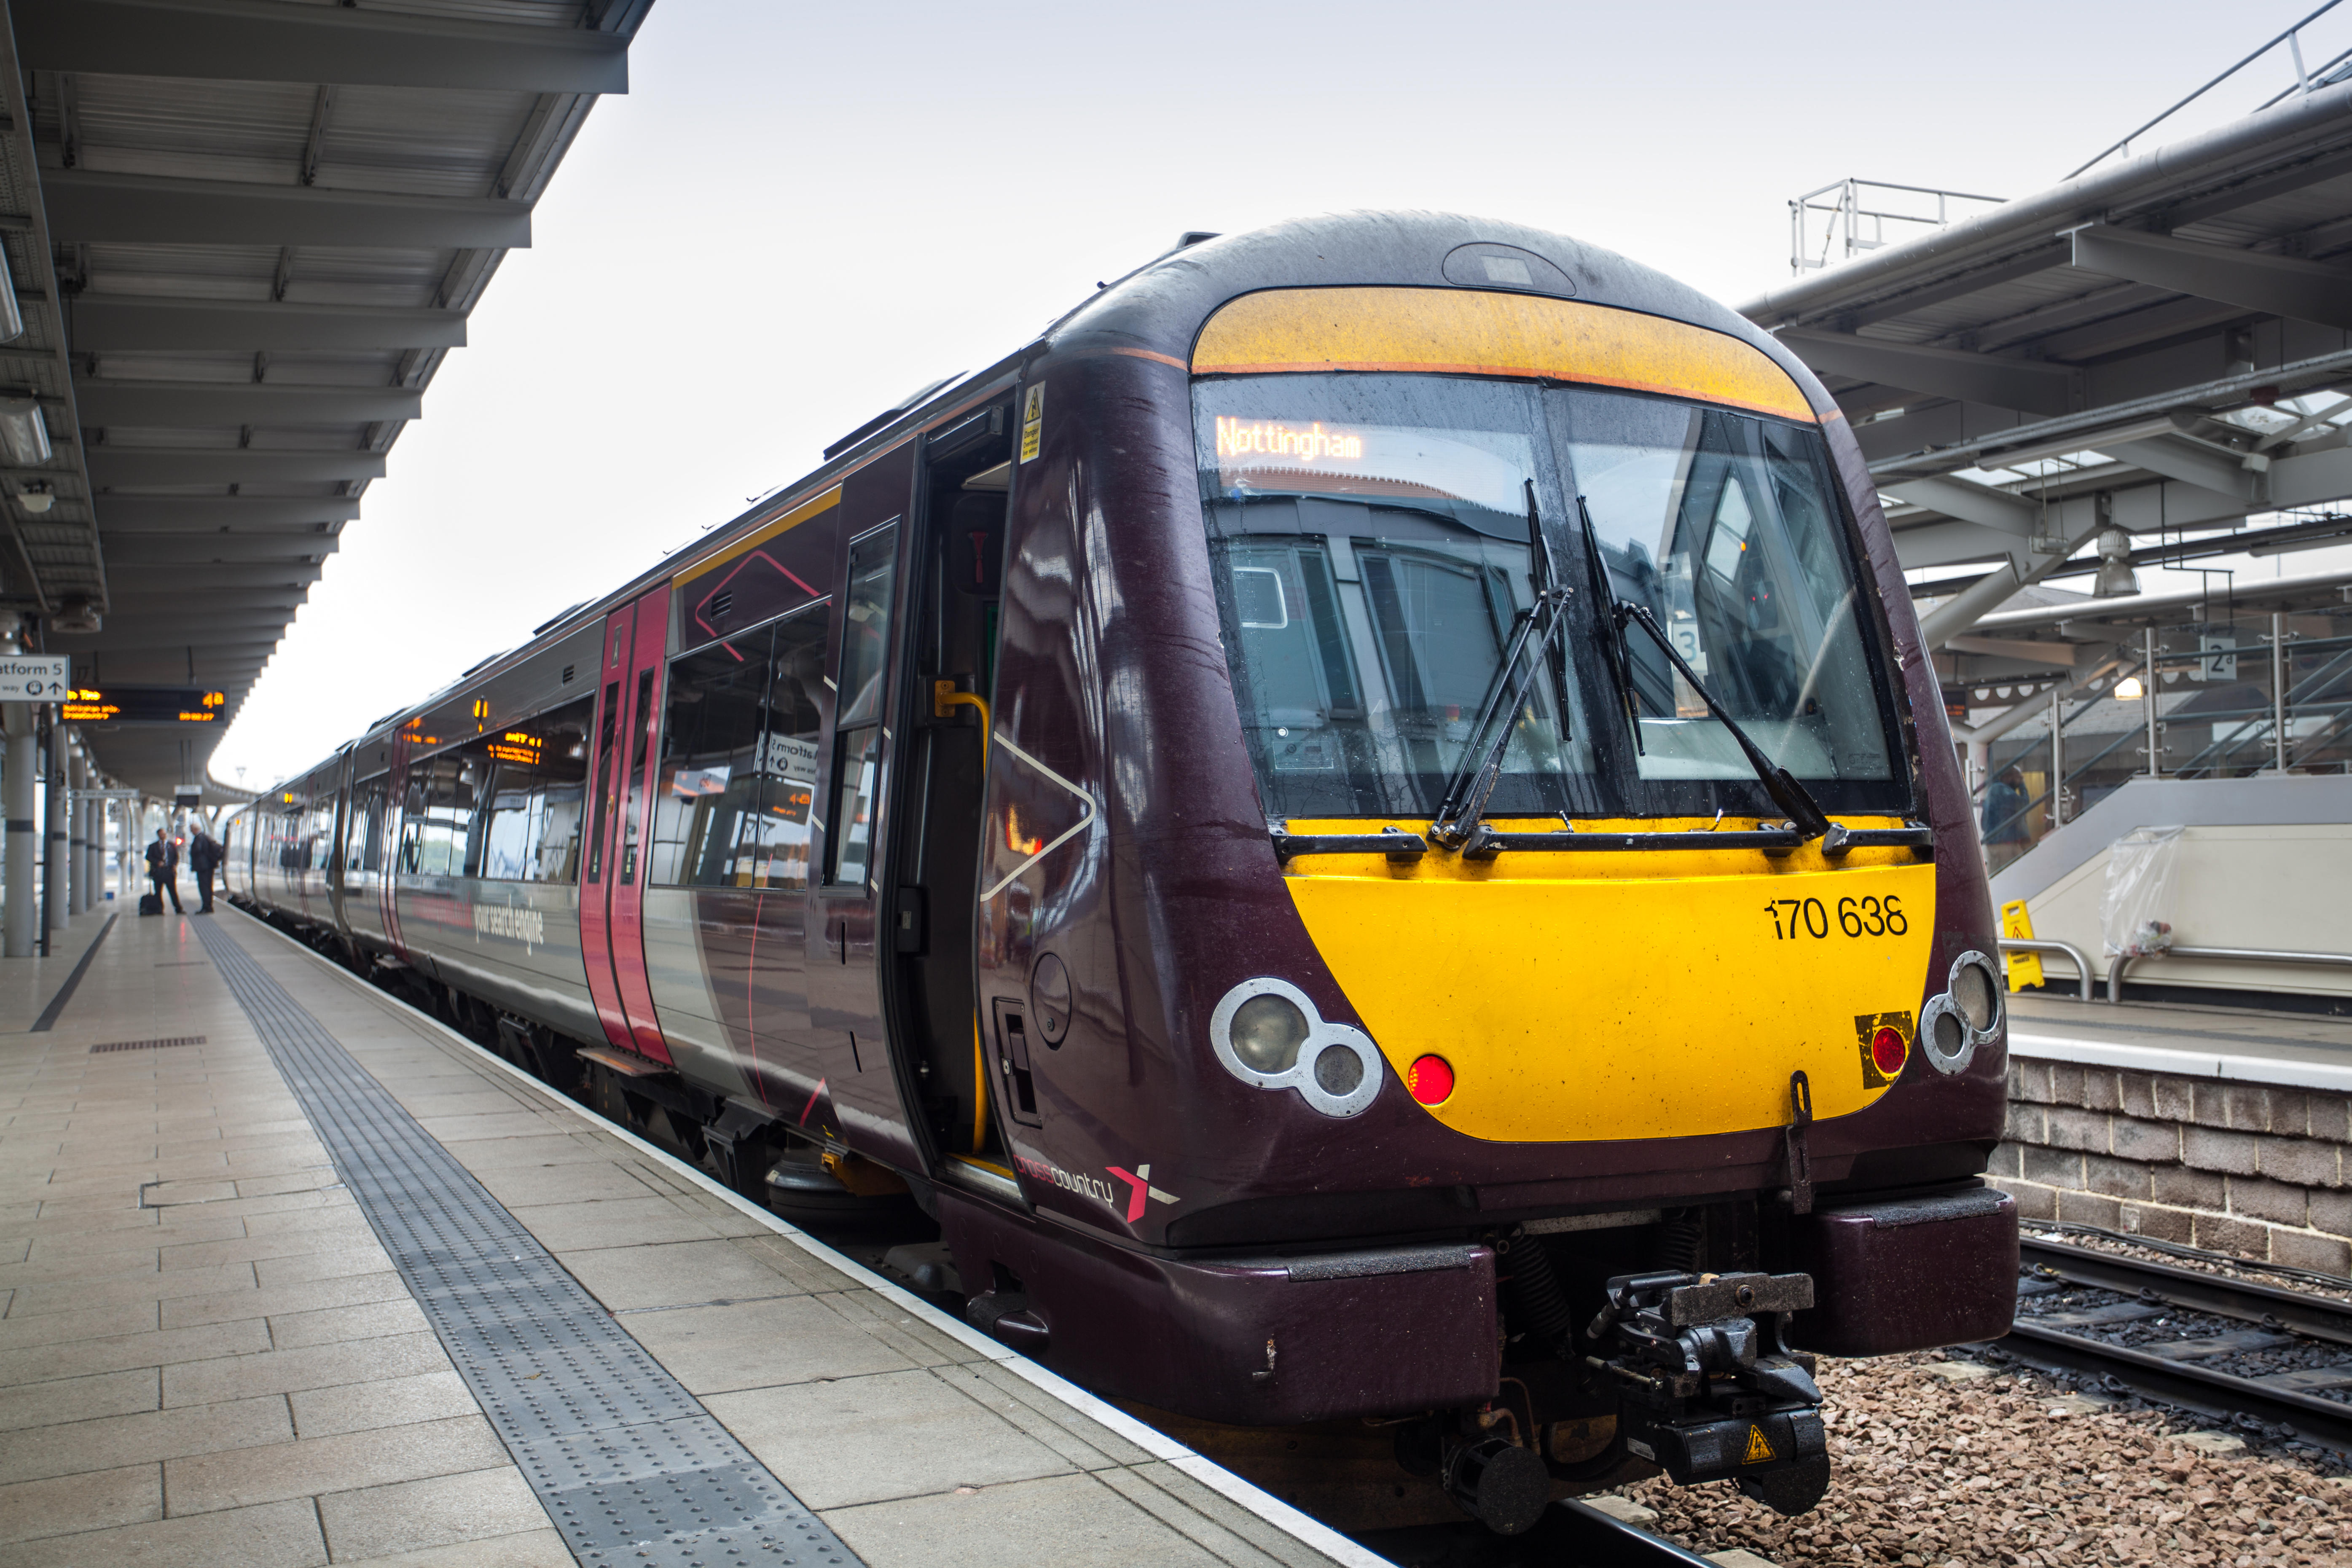 A CrossCountry train at Derby station